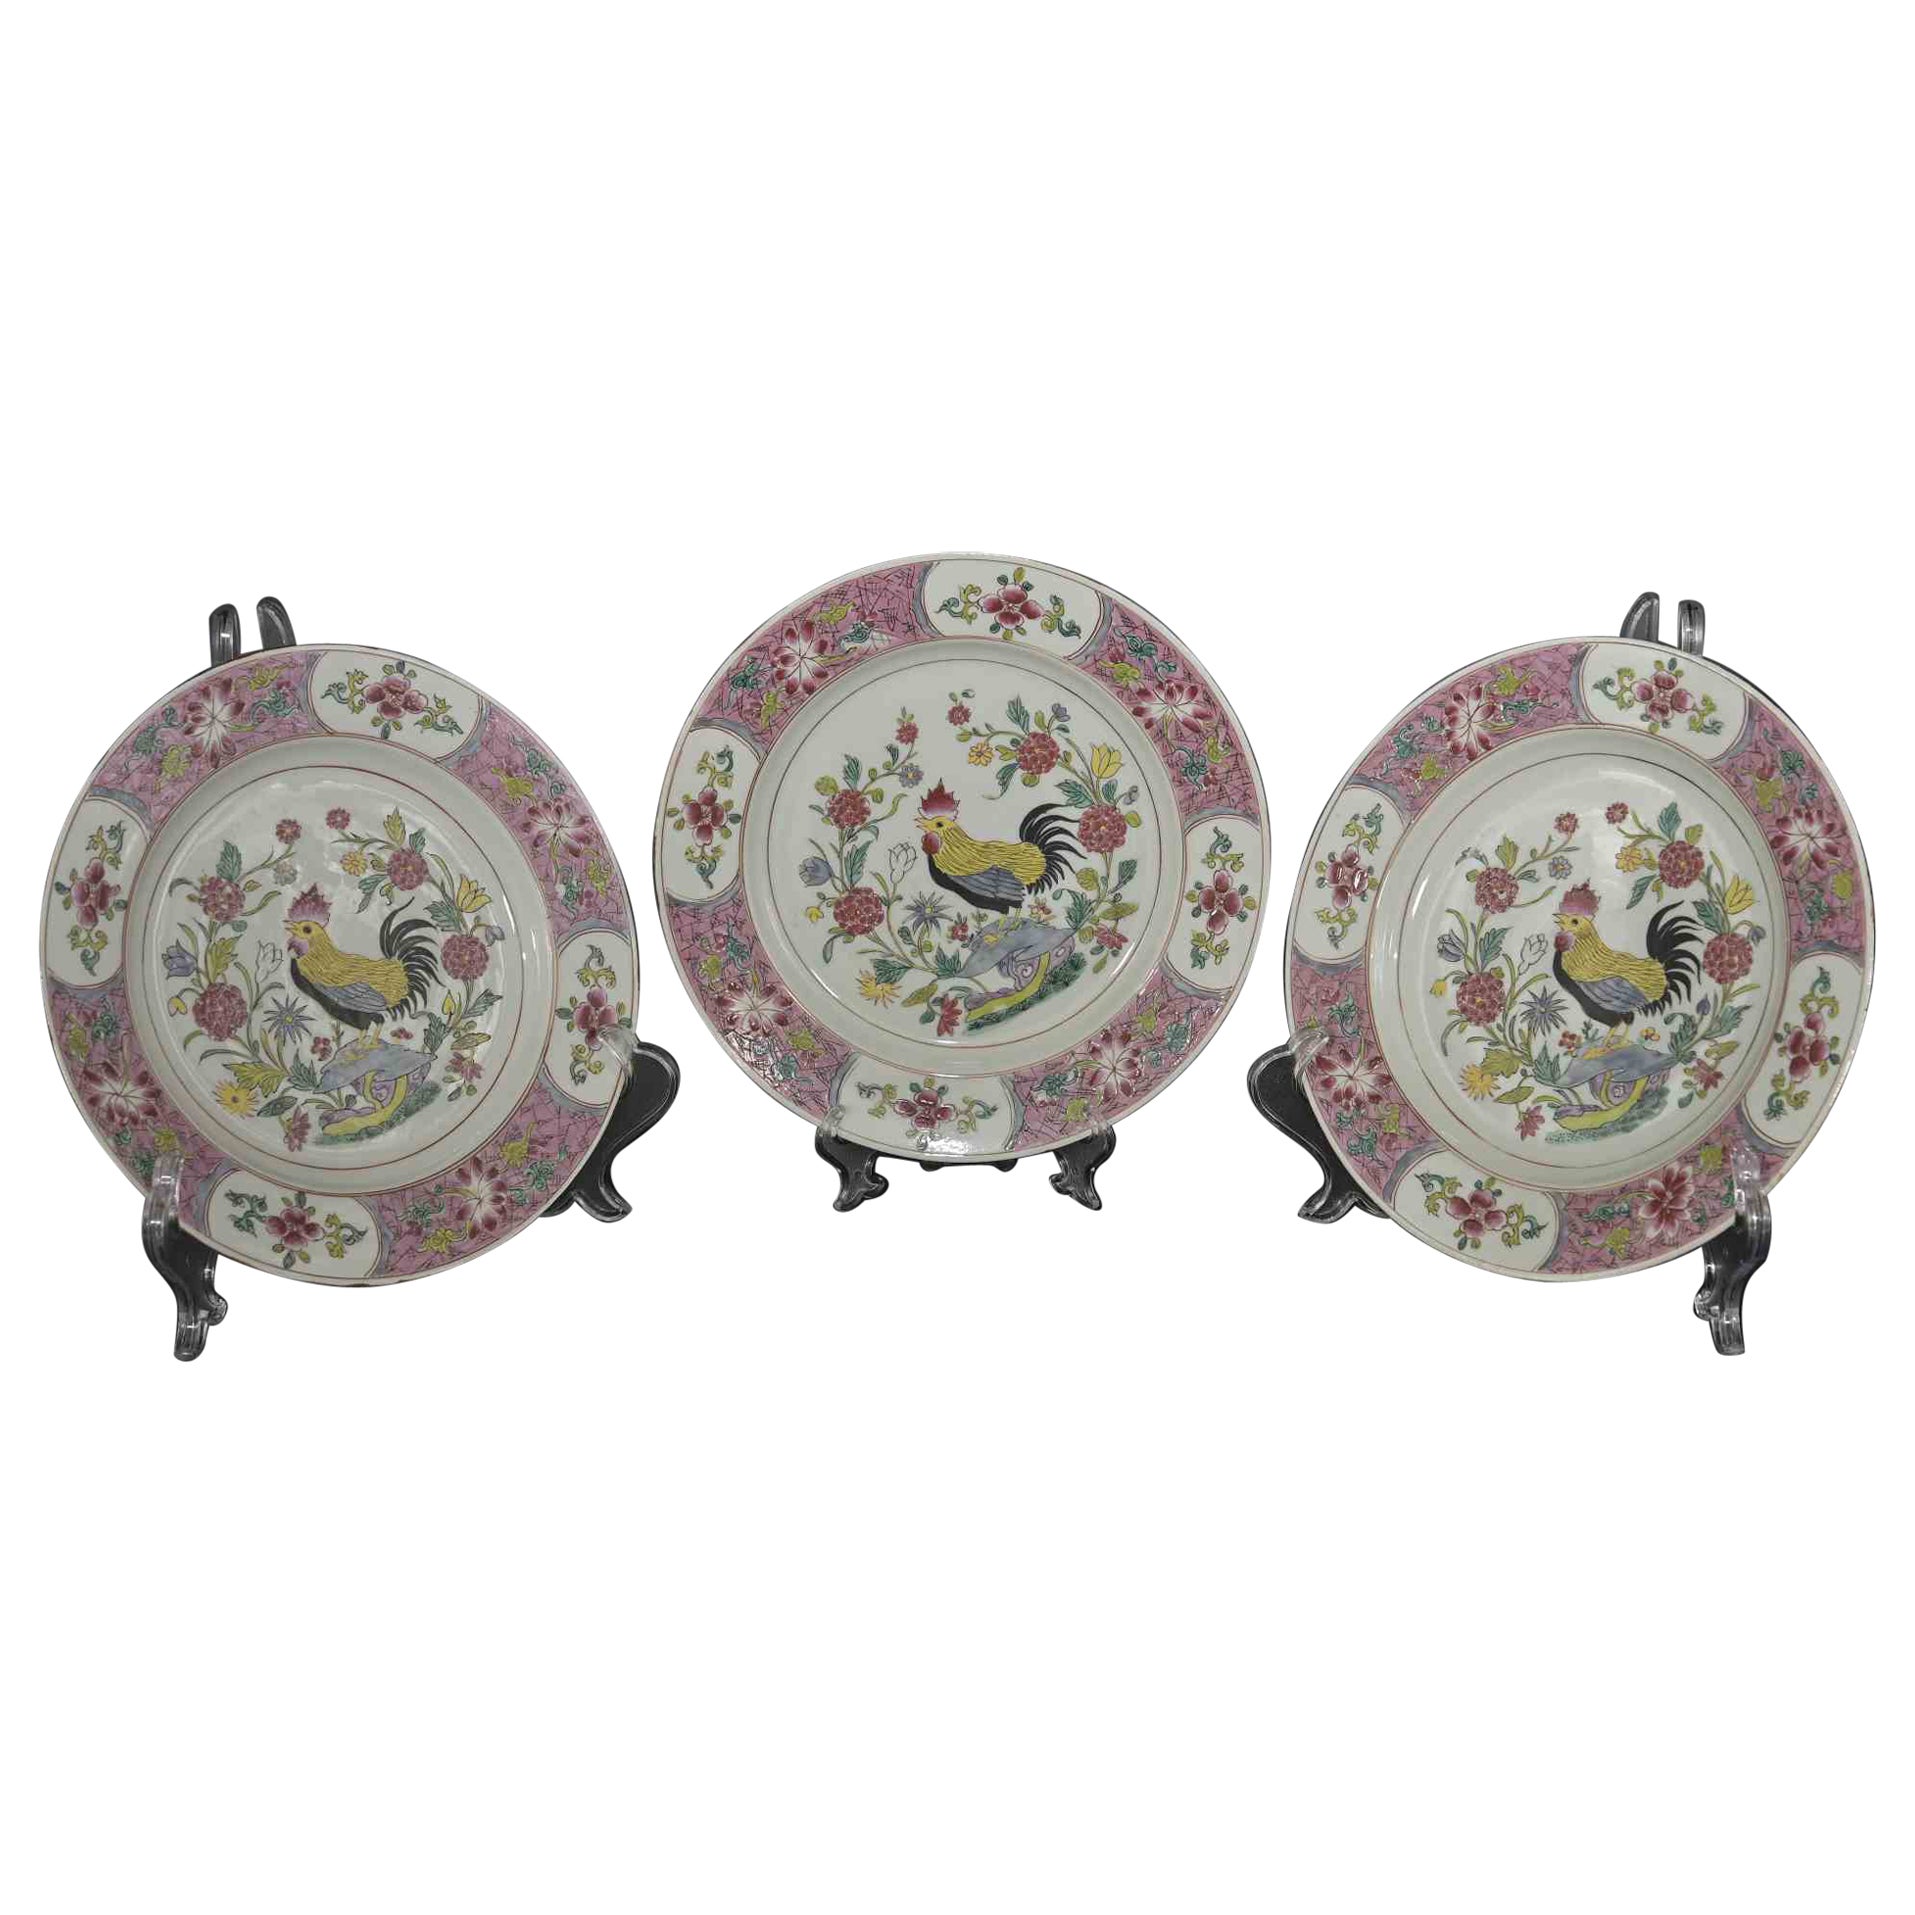 Set of 3 Chinese Ceramic Plates, Mid-20th Century For Sale